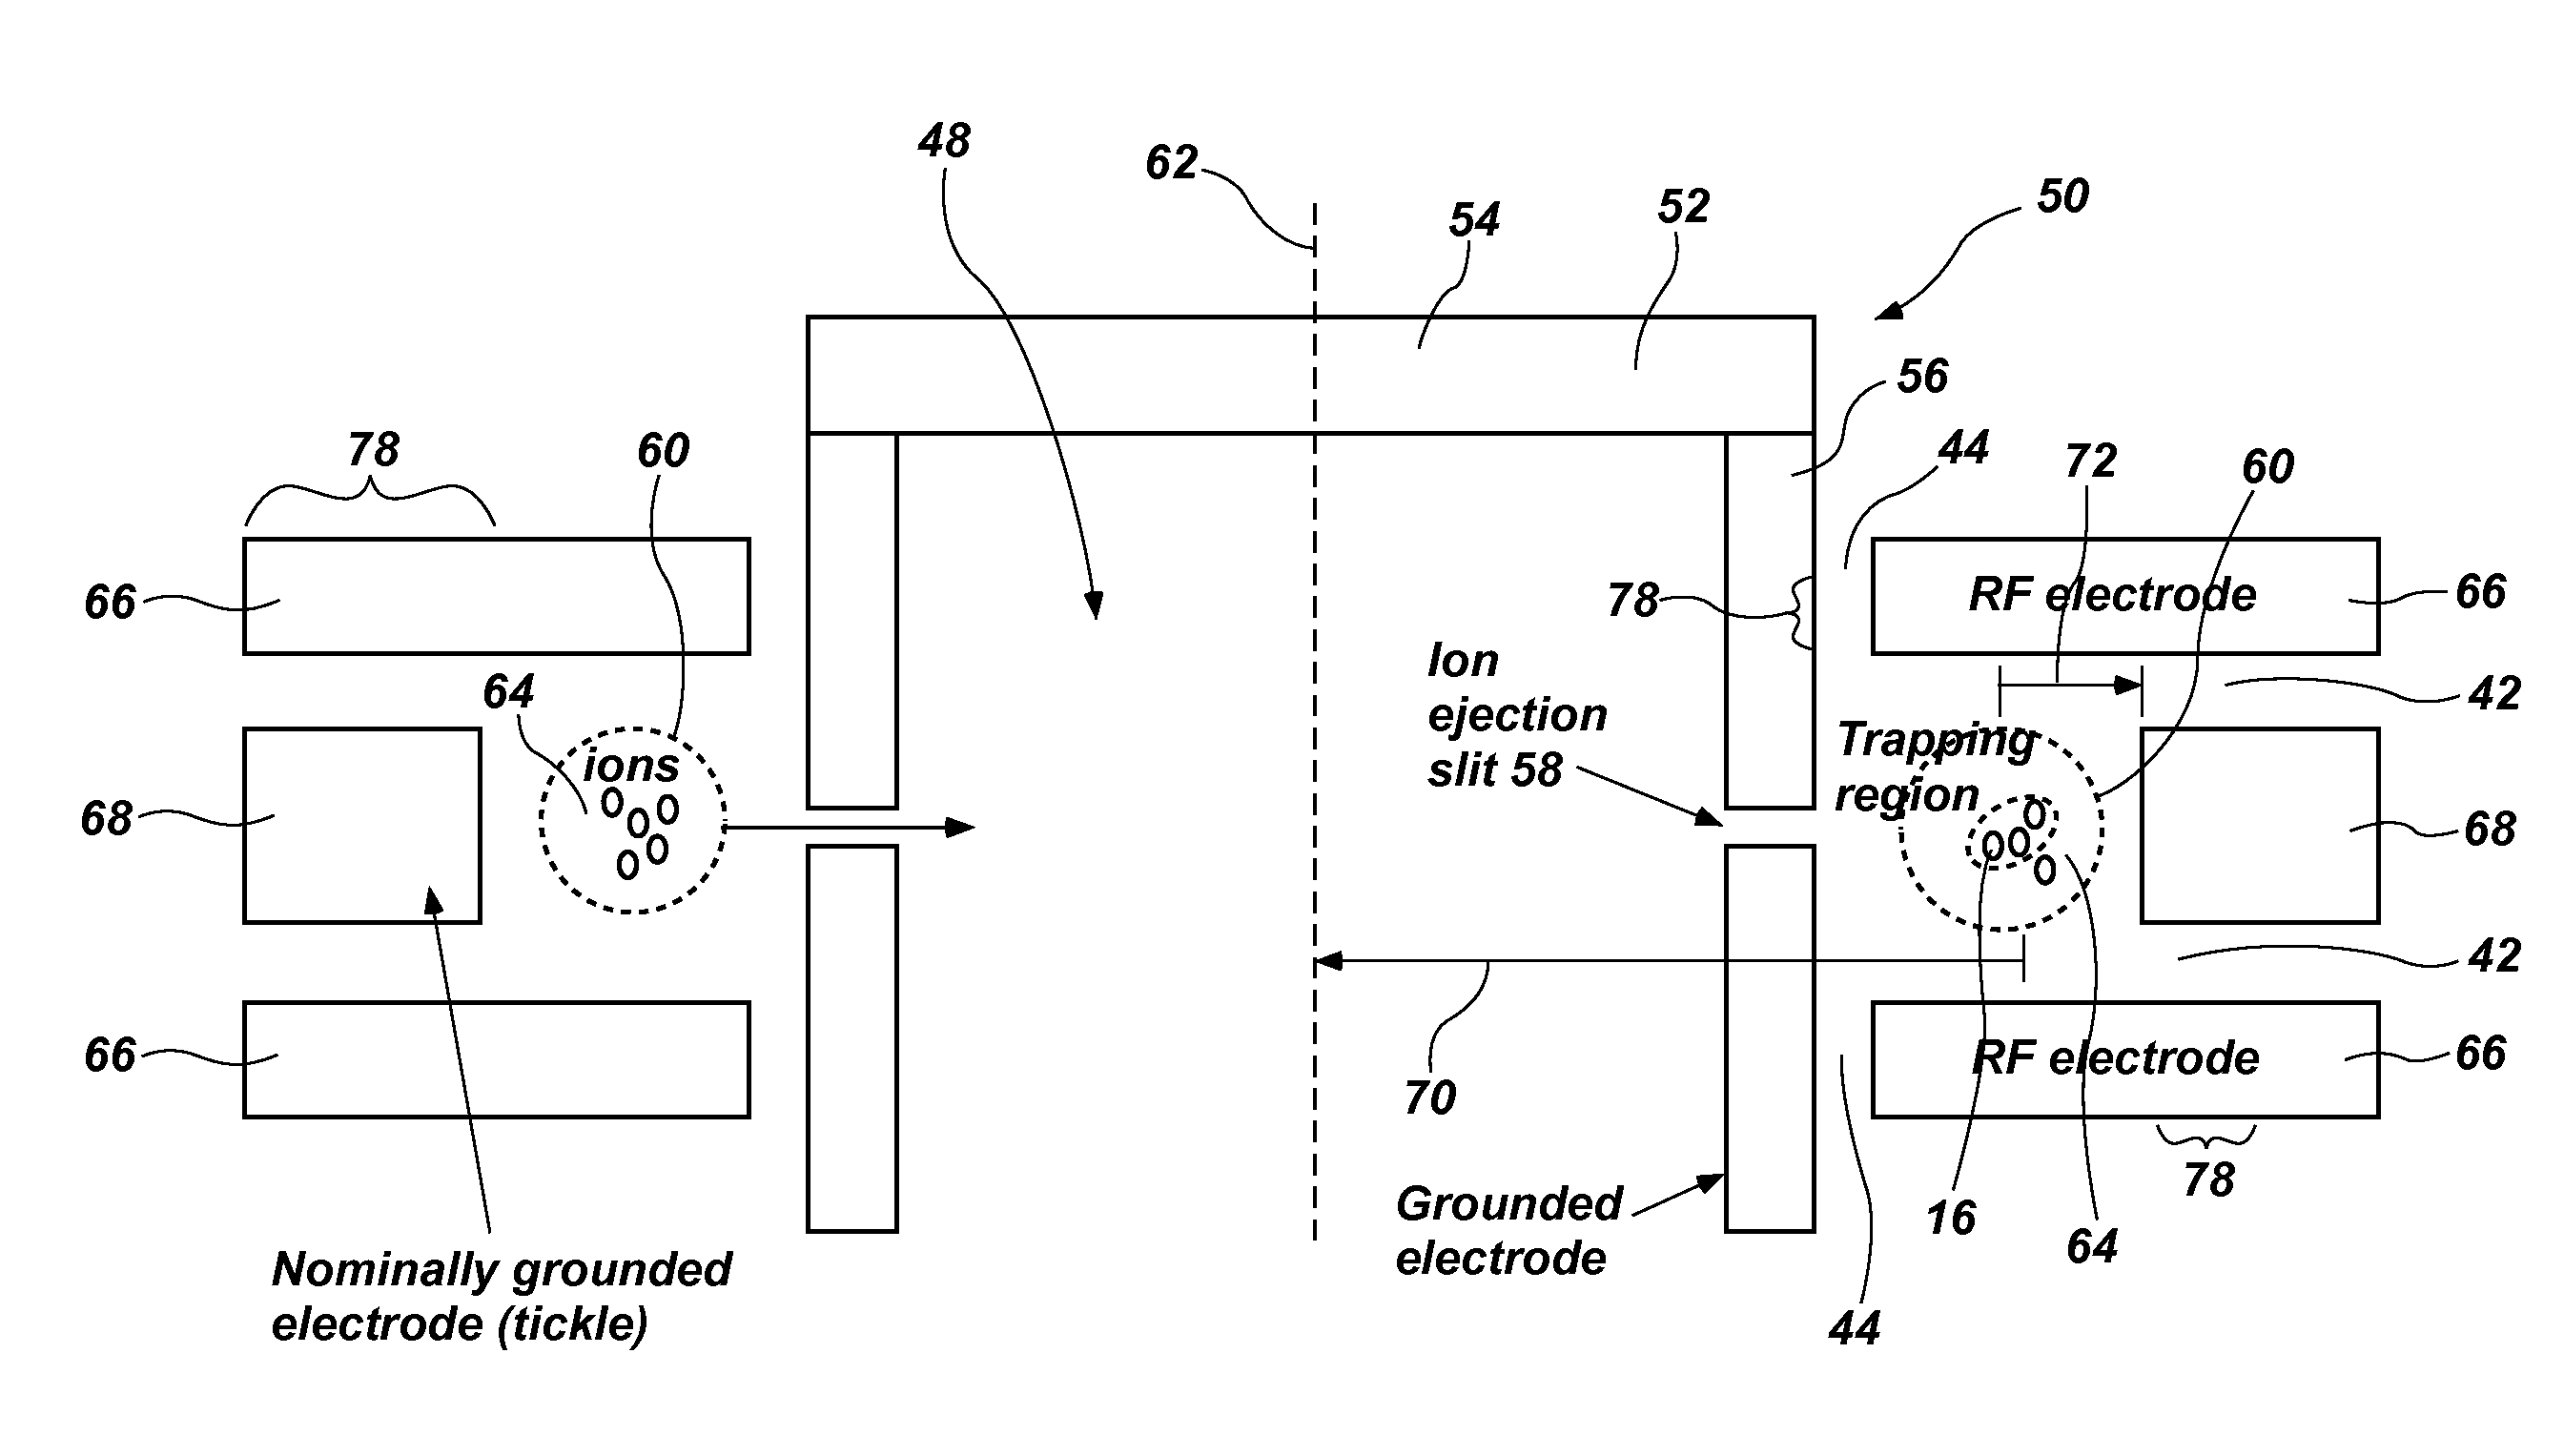 Toroidal ion trap mass analyzer with cylindrical electrodes